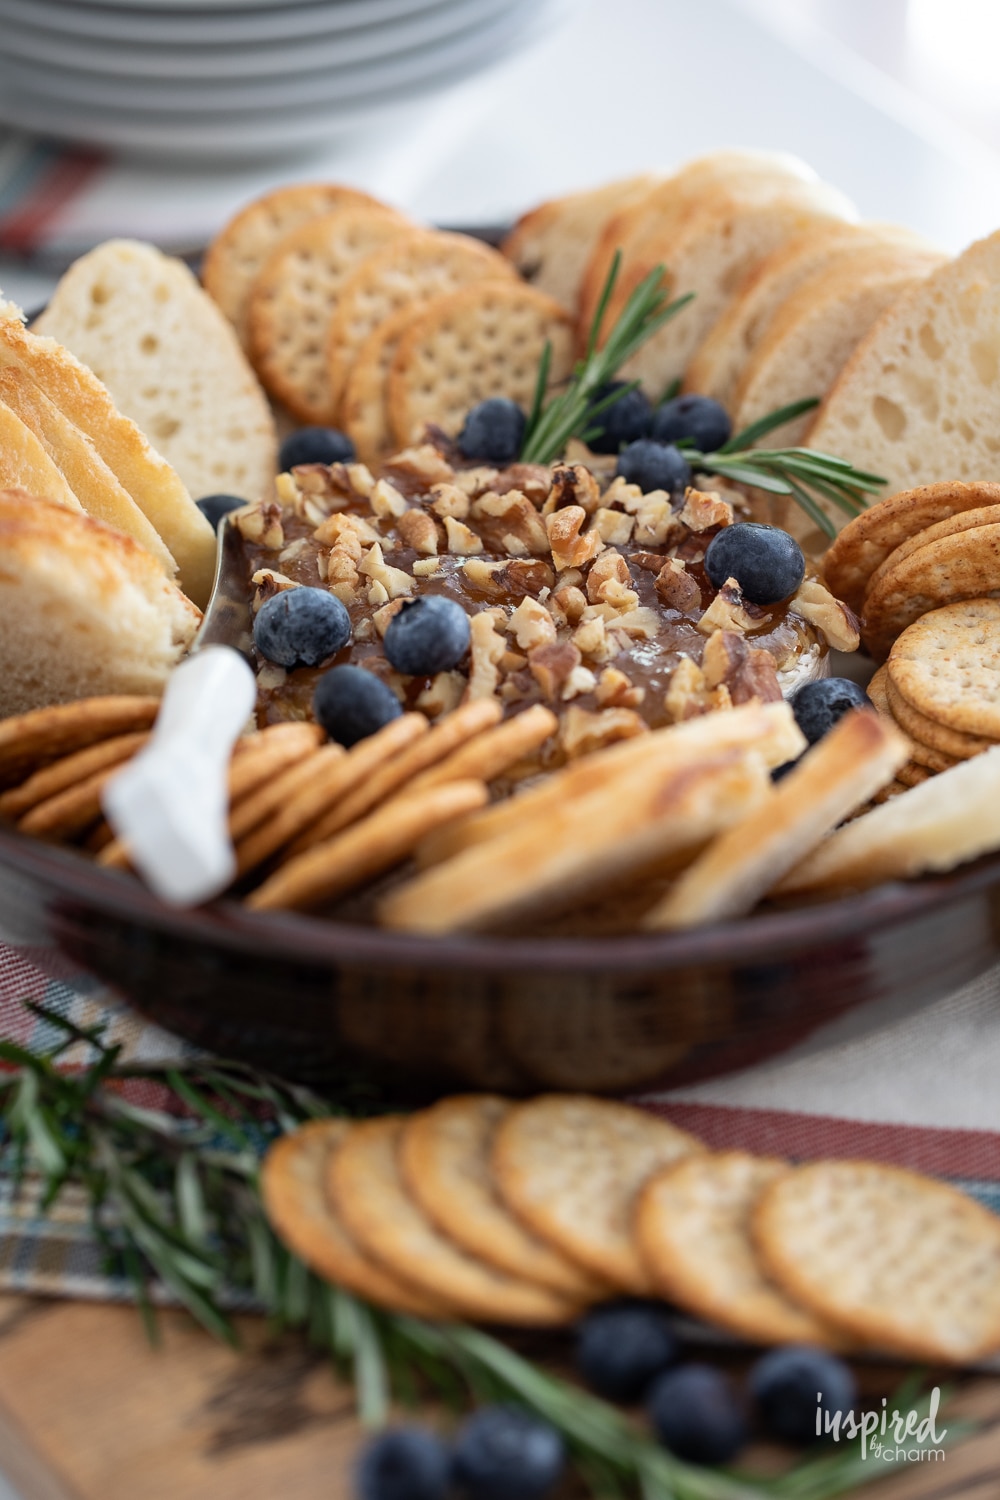 baked brie served with jam, crackers, and bread in a round dish.